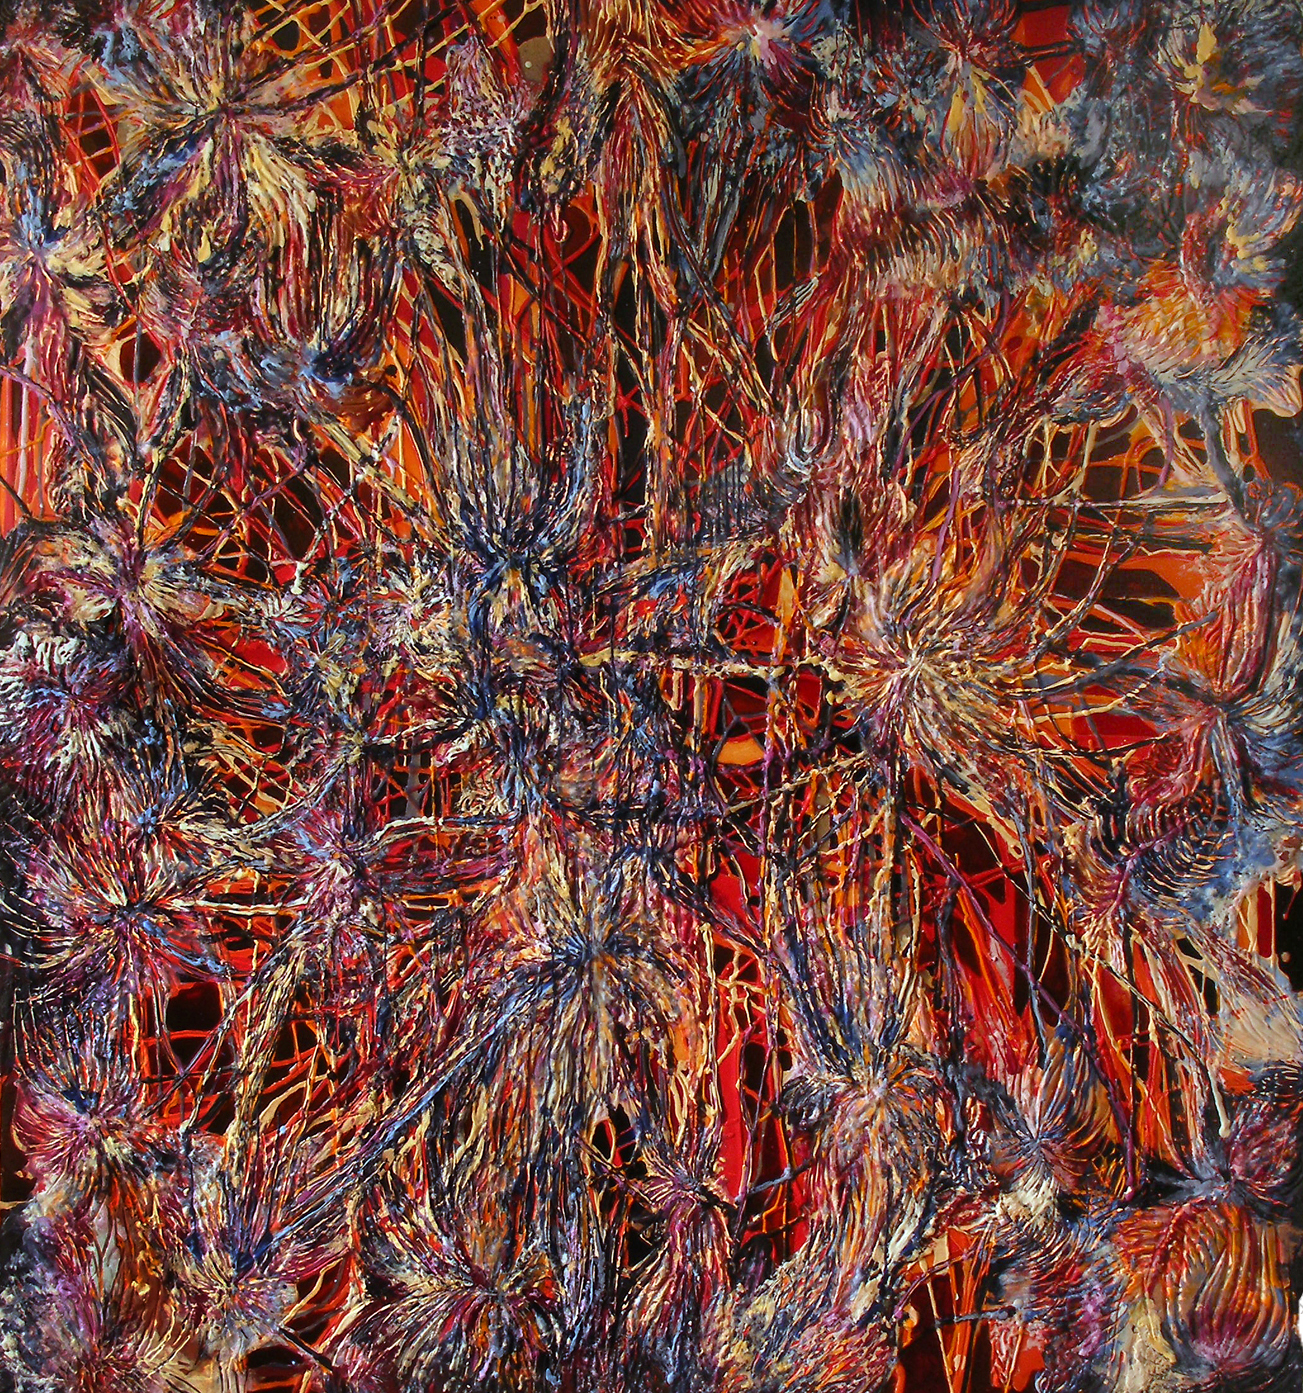 Rampage, 2008, encaustic and urethane on panel, 66 x 60 inches